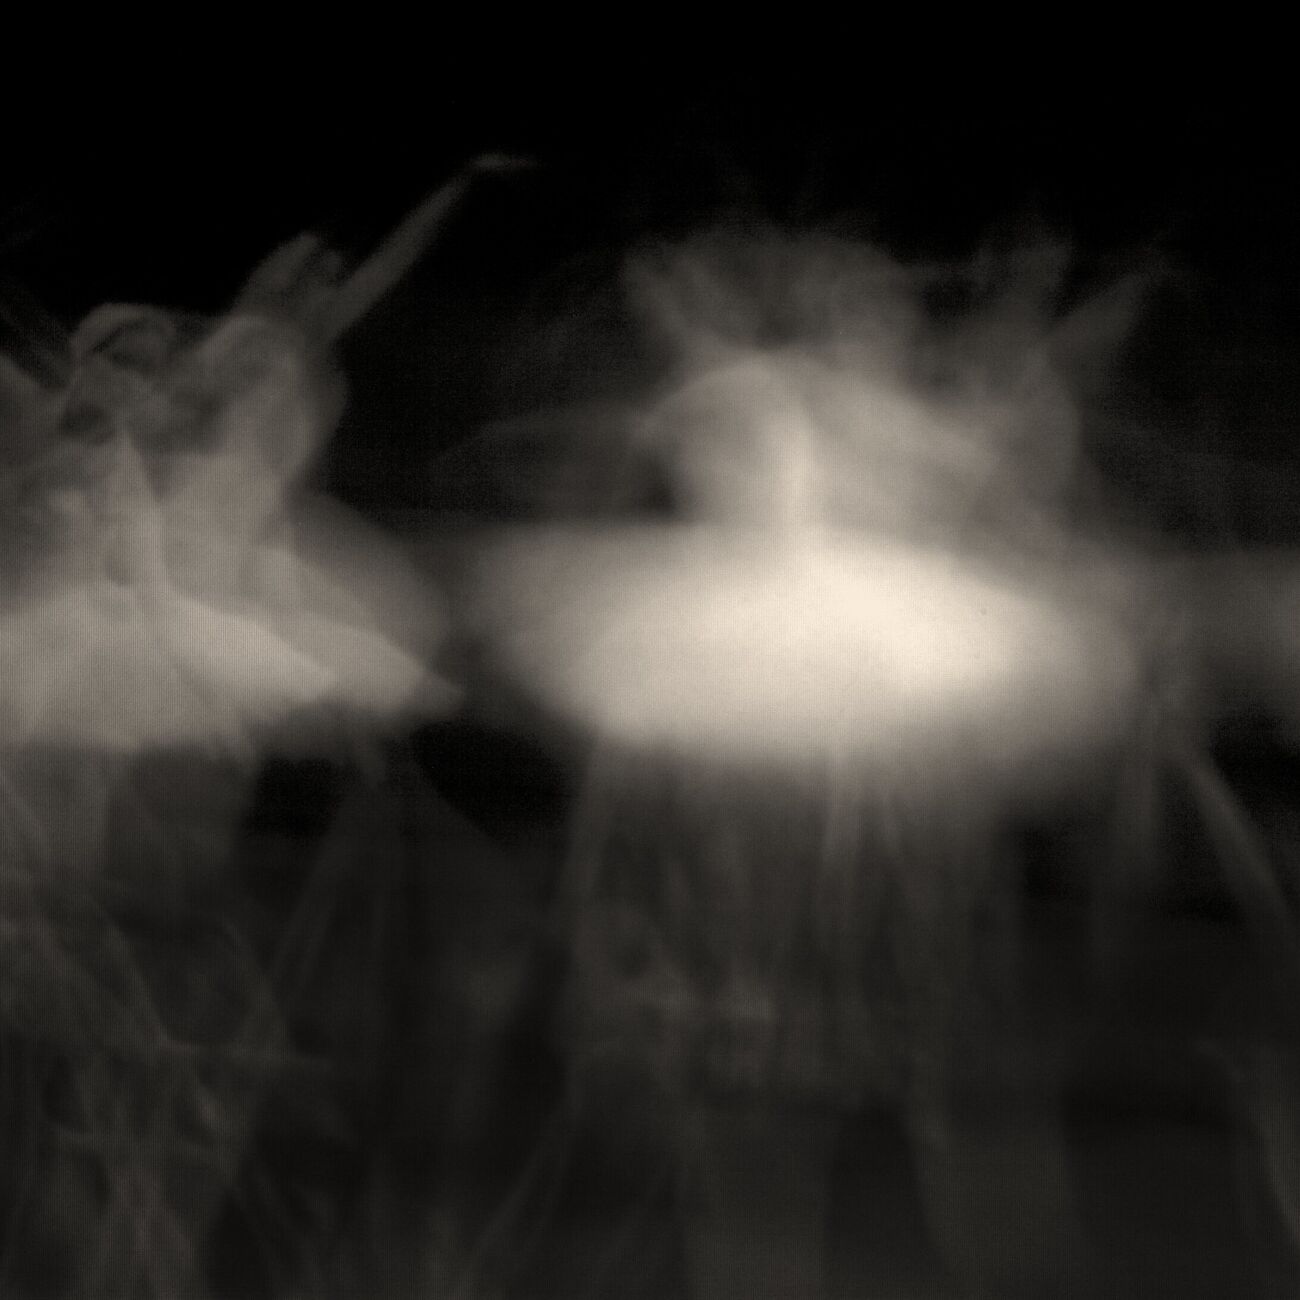 Ghost Opera, Study 14, The Swan Lake, Berlin, Germany. April 1998. Ref-864 - Denis Olivier Photography